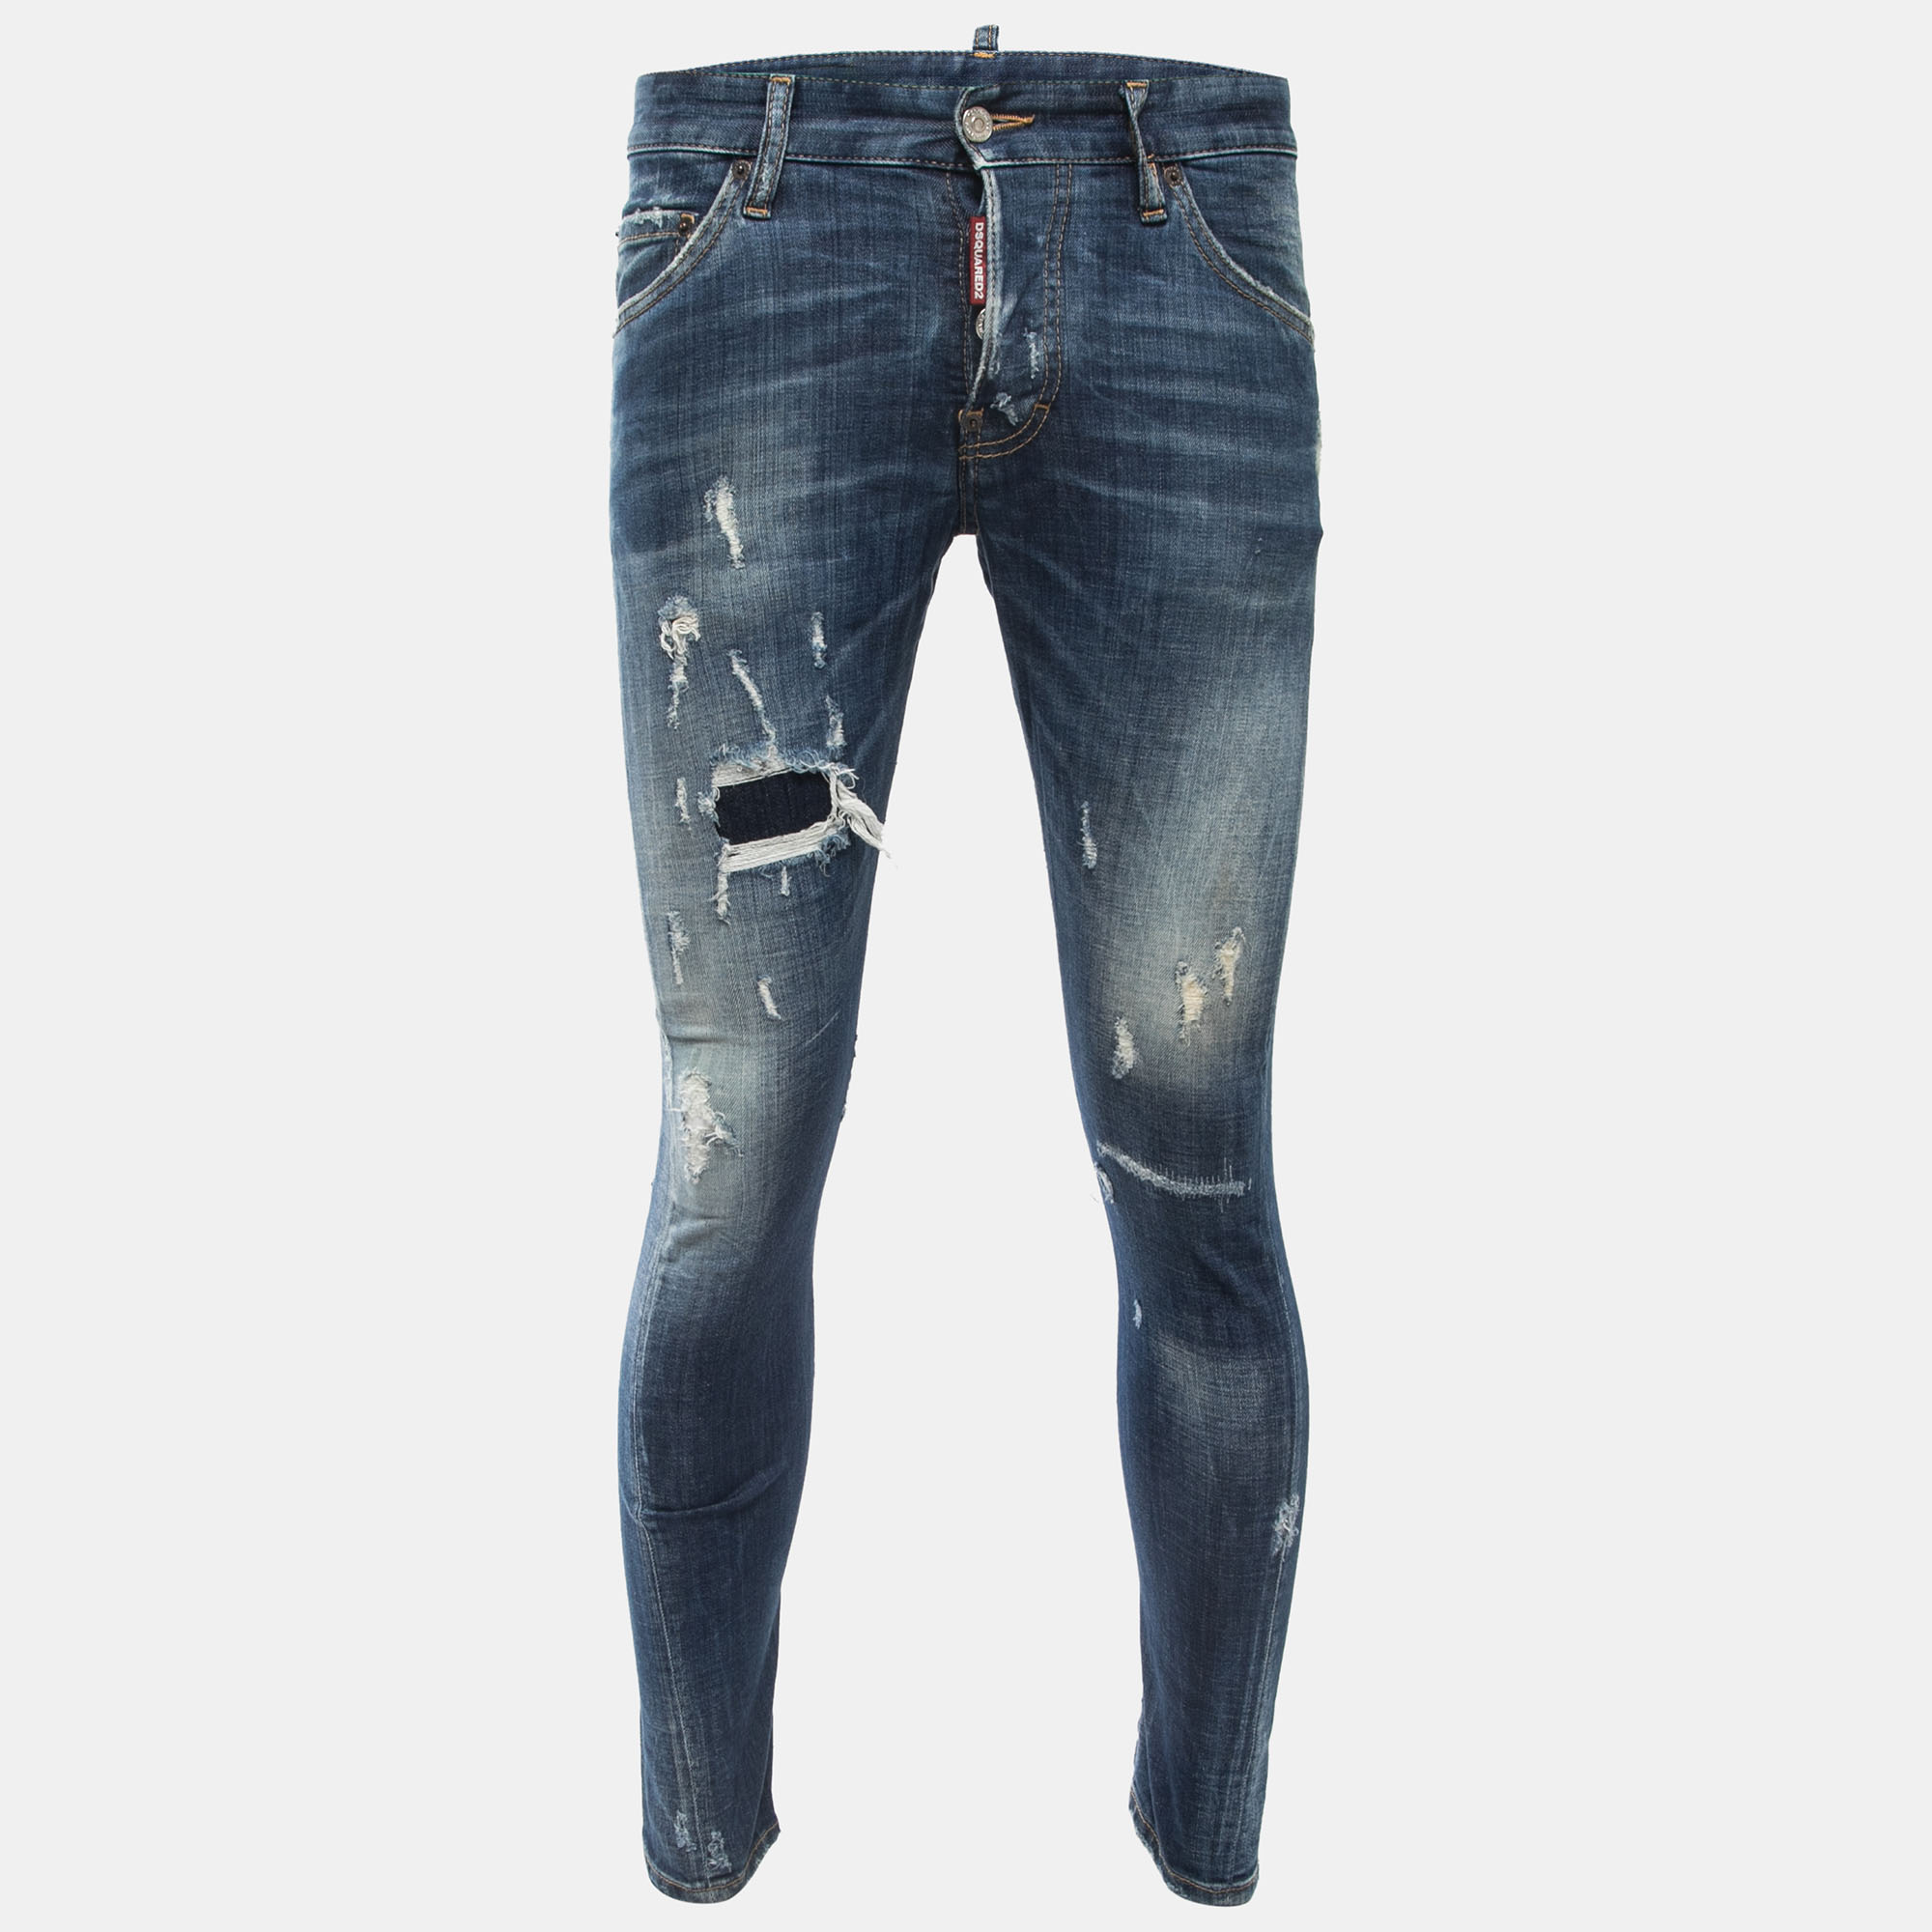 Dsquared2 Blue Washed & Distressed Denim Jeans S Waist 32